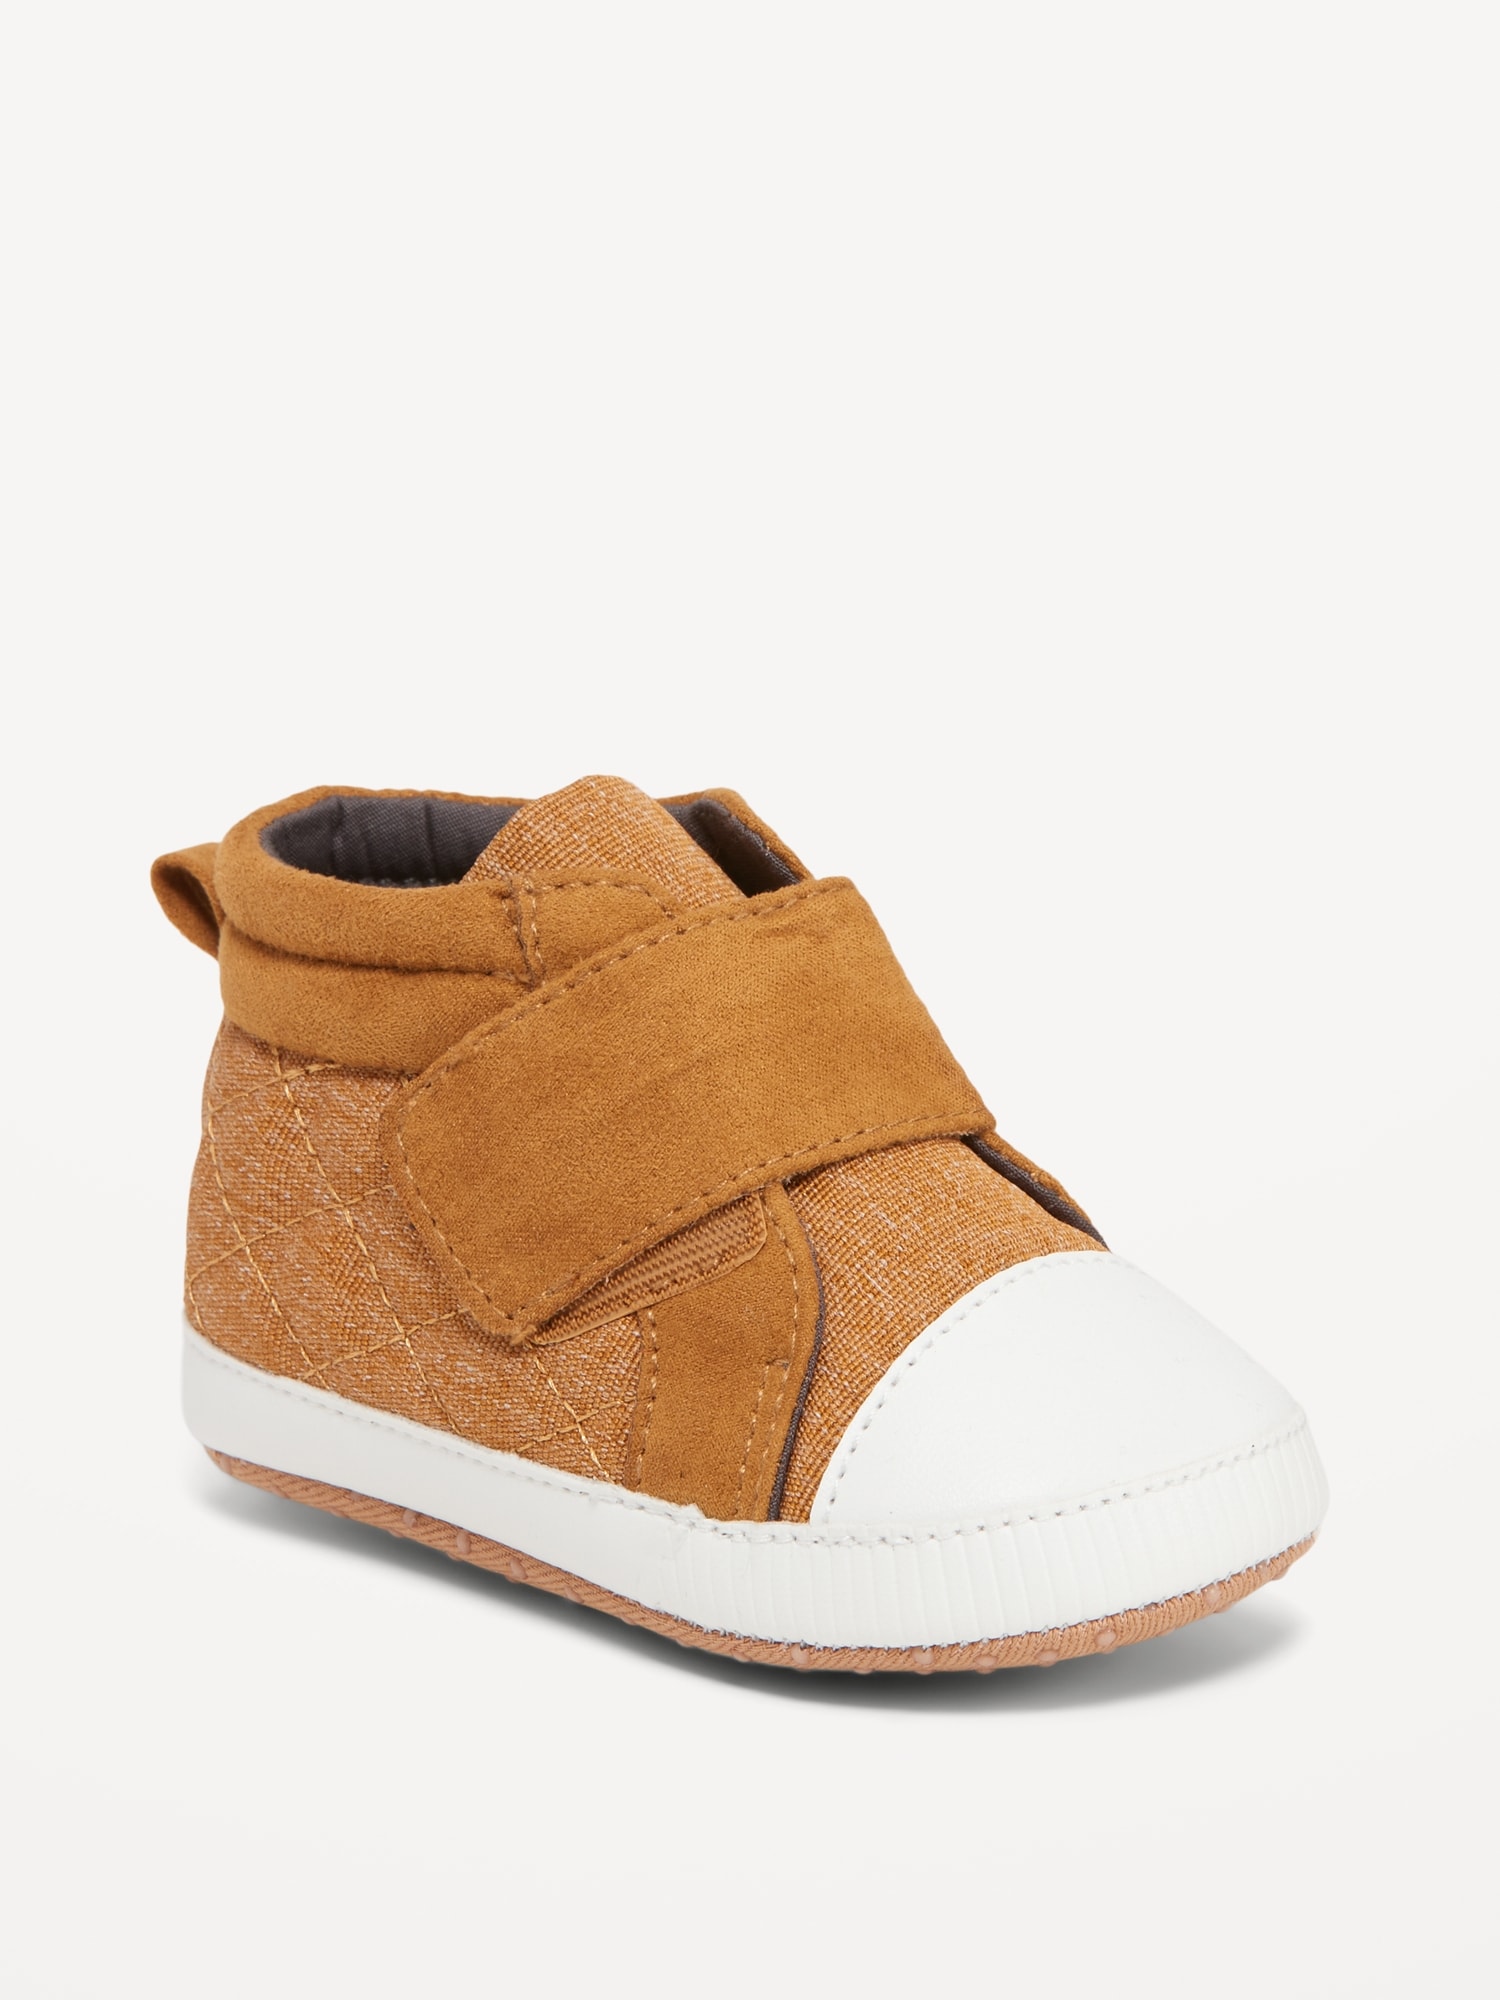 High-Top Quilted Textured Sneakers for Baby